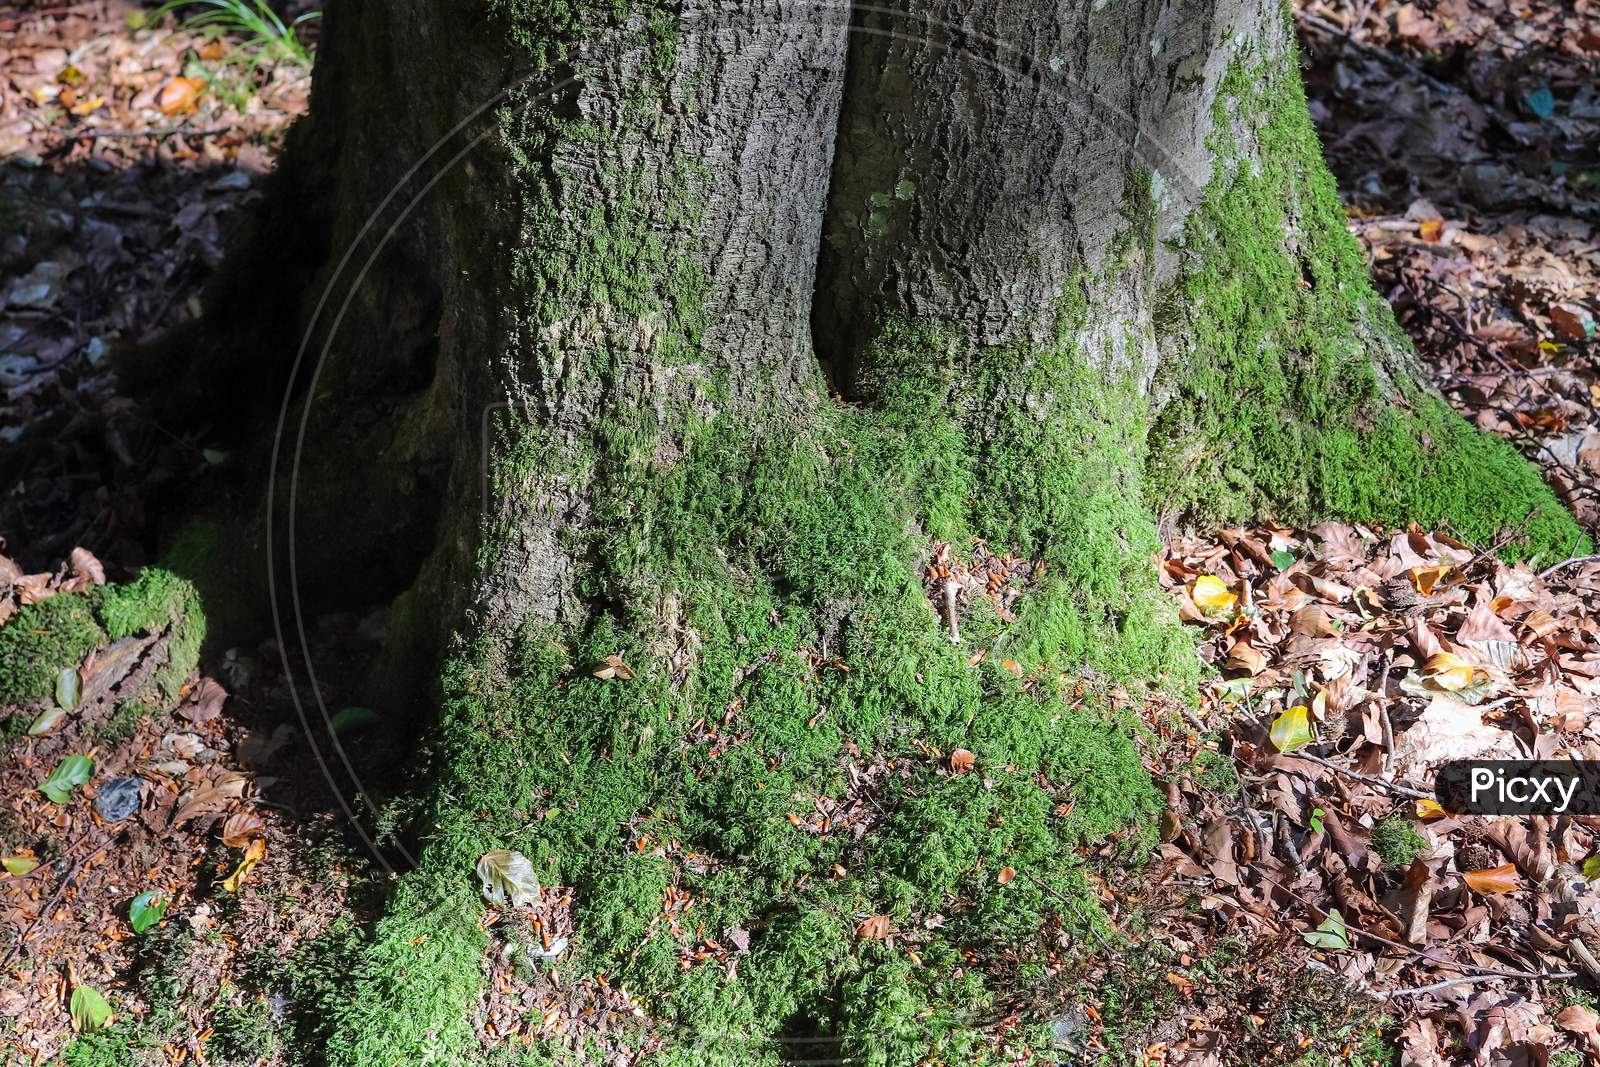 An old tree trunk in a european forest landscape environment